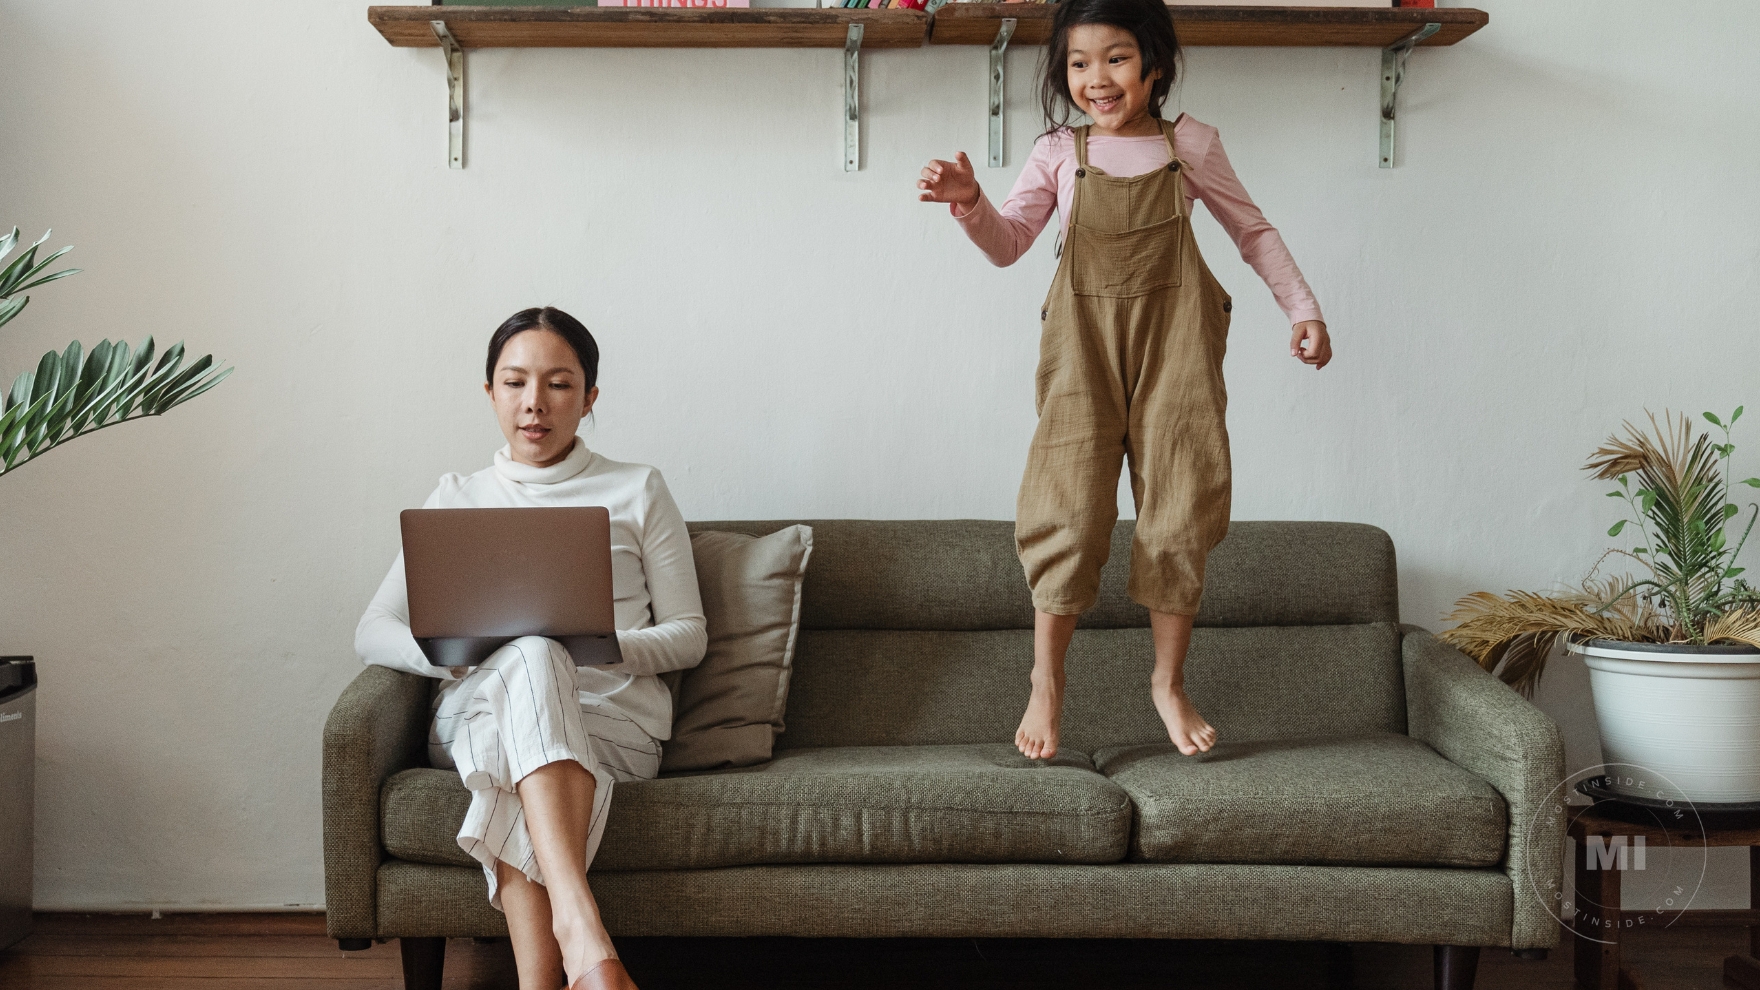 Hacks For Studying When Having A Child at Home